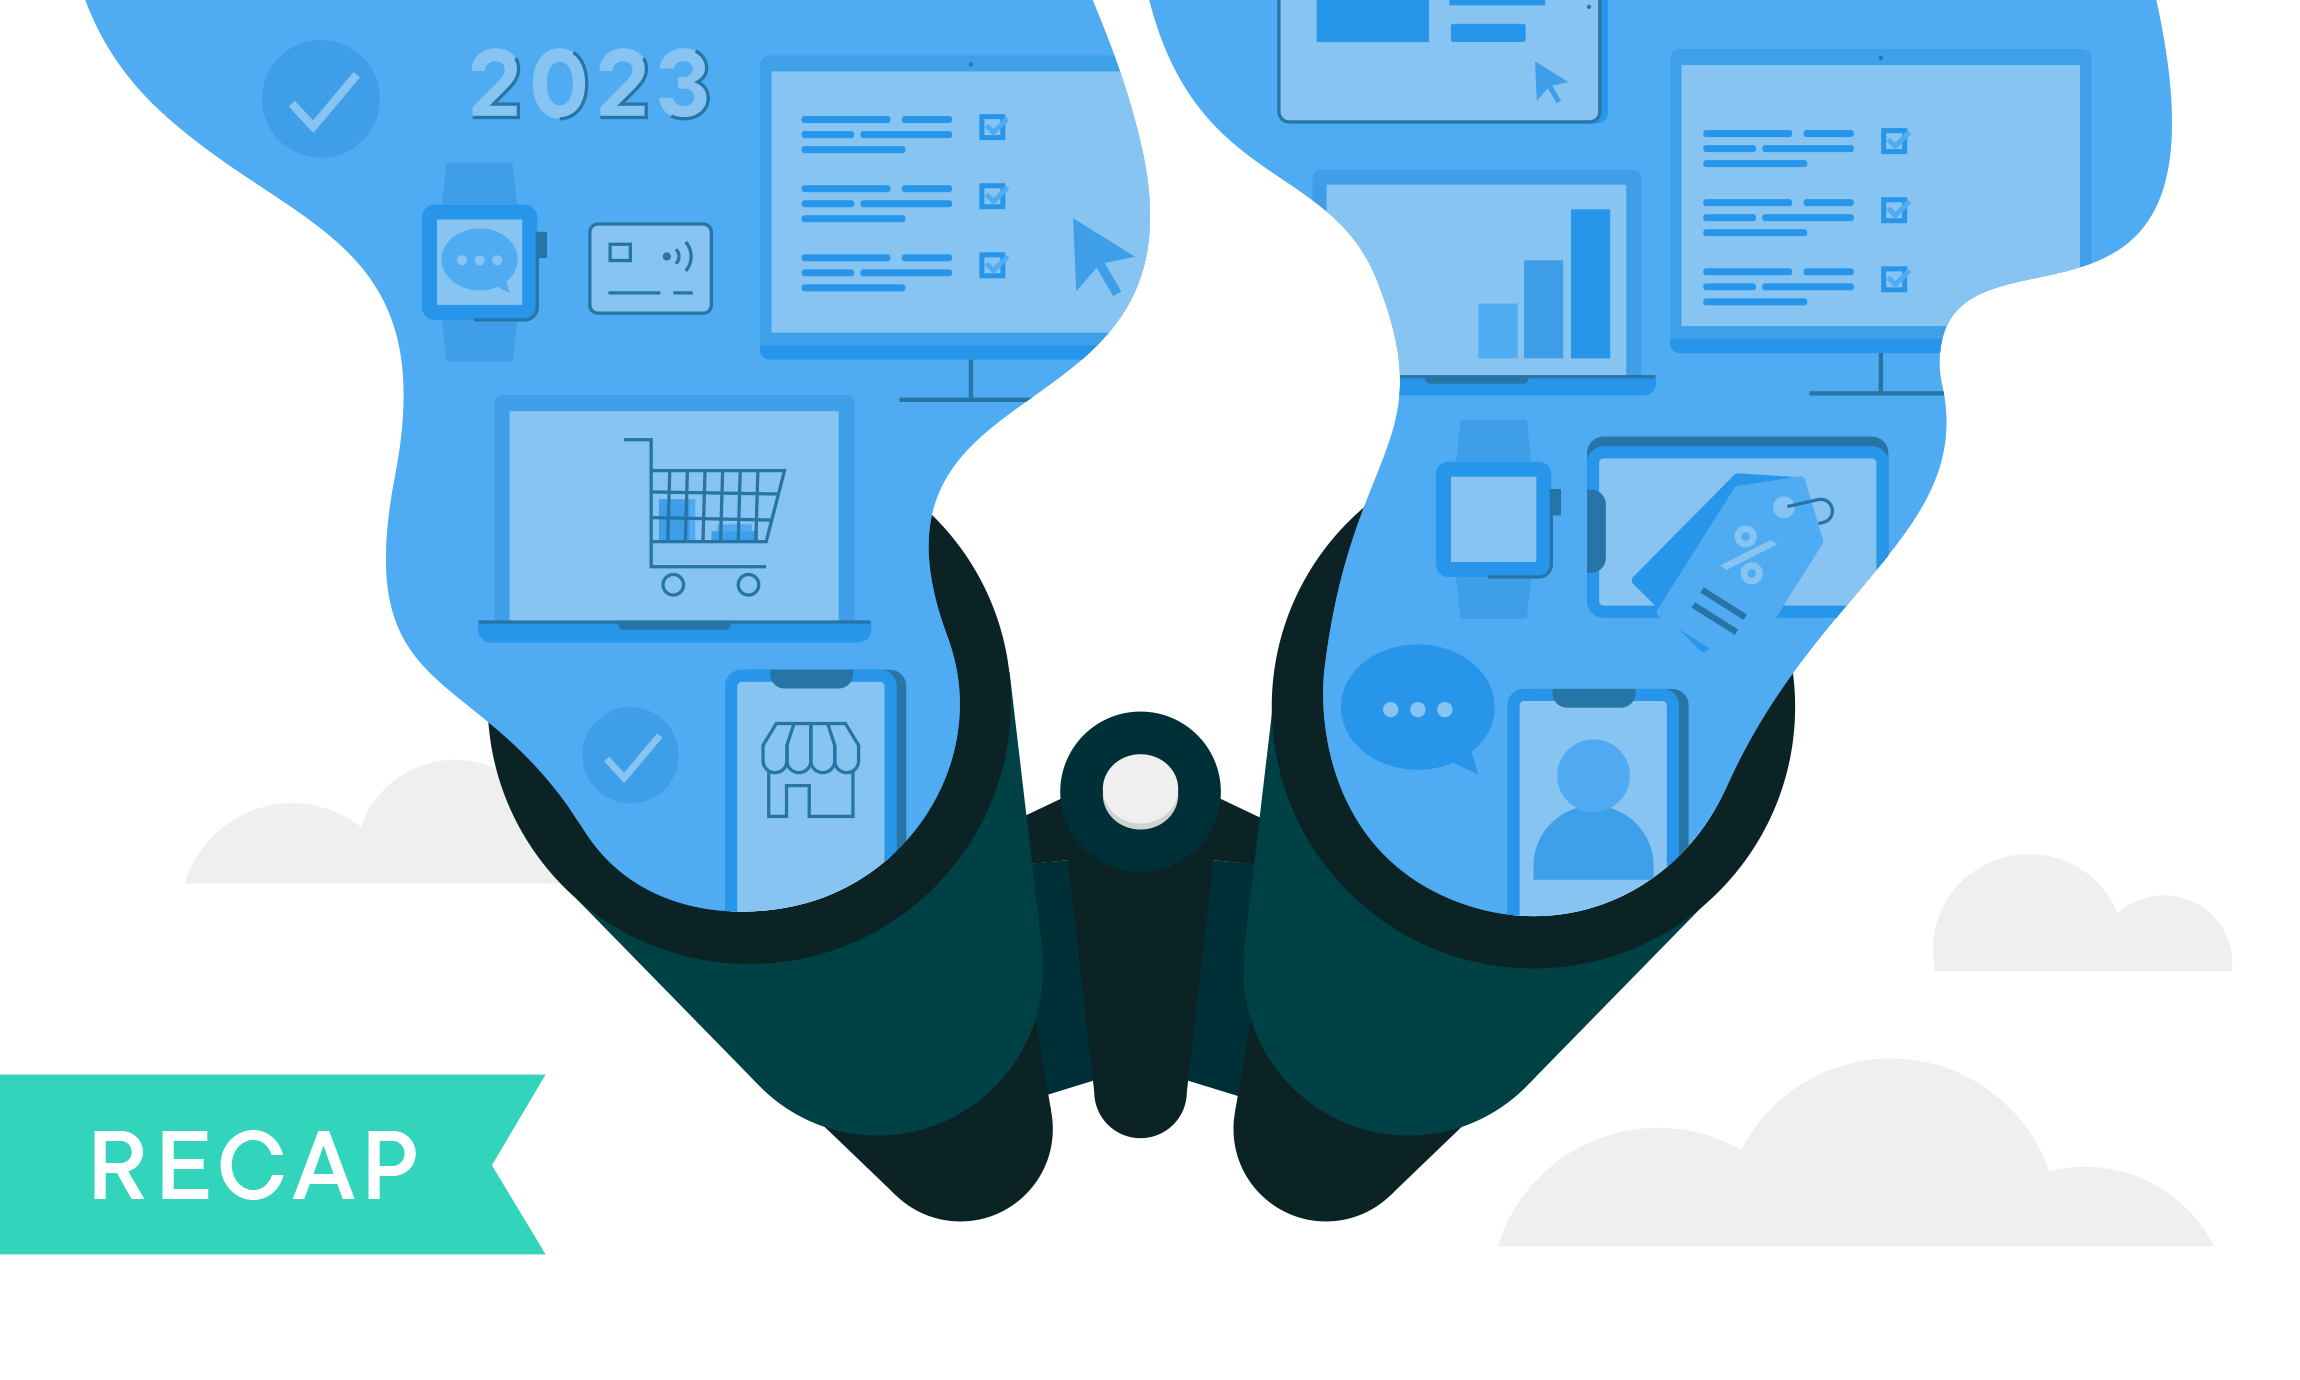 An overview of commercetools trends and predictions for 2023